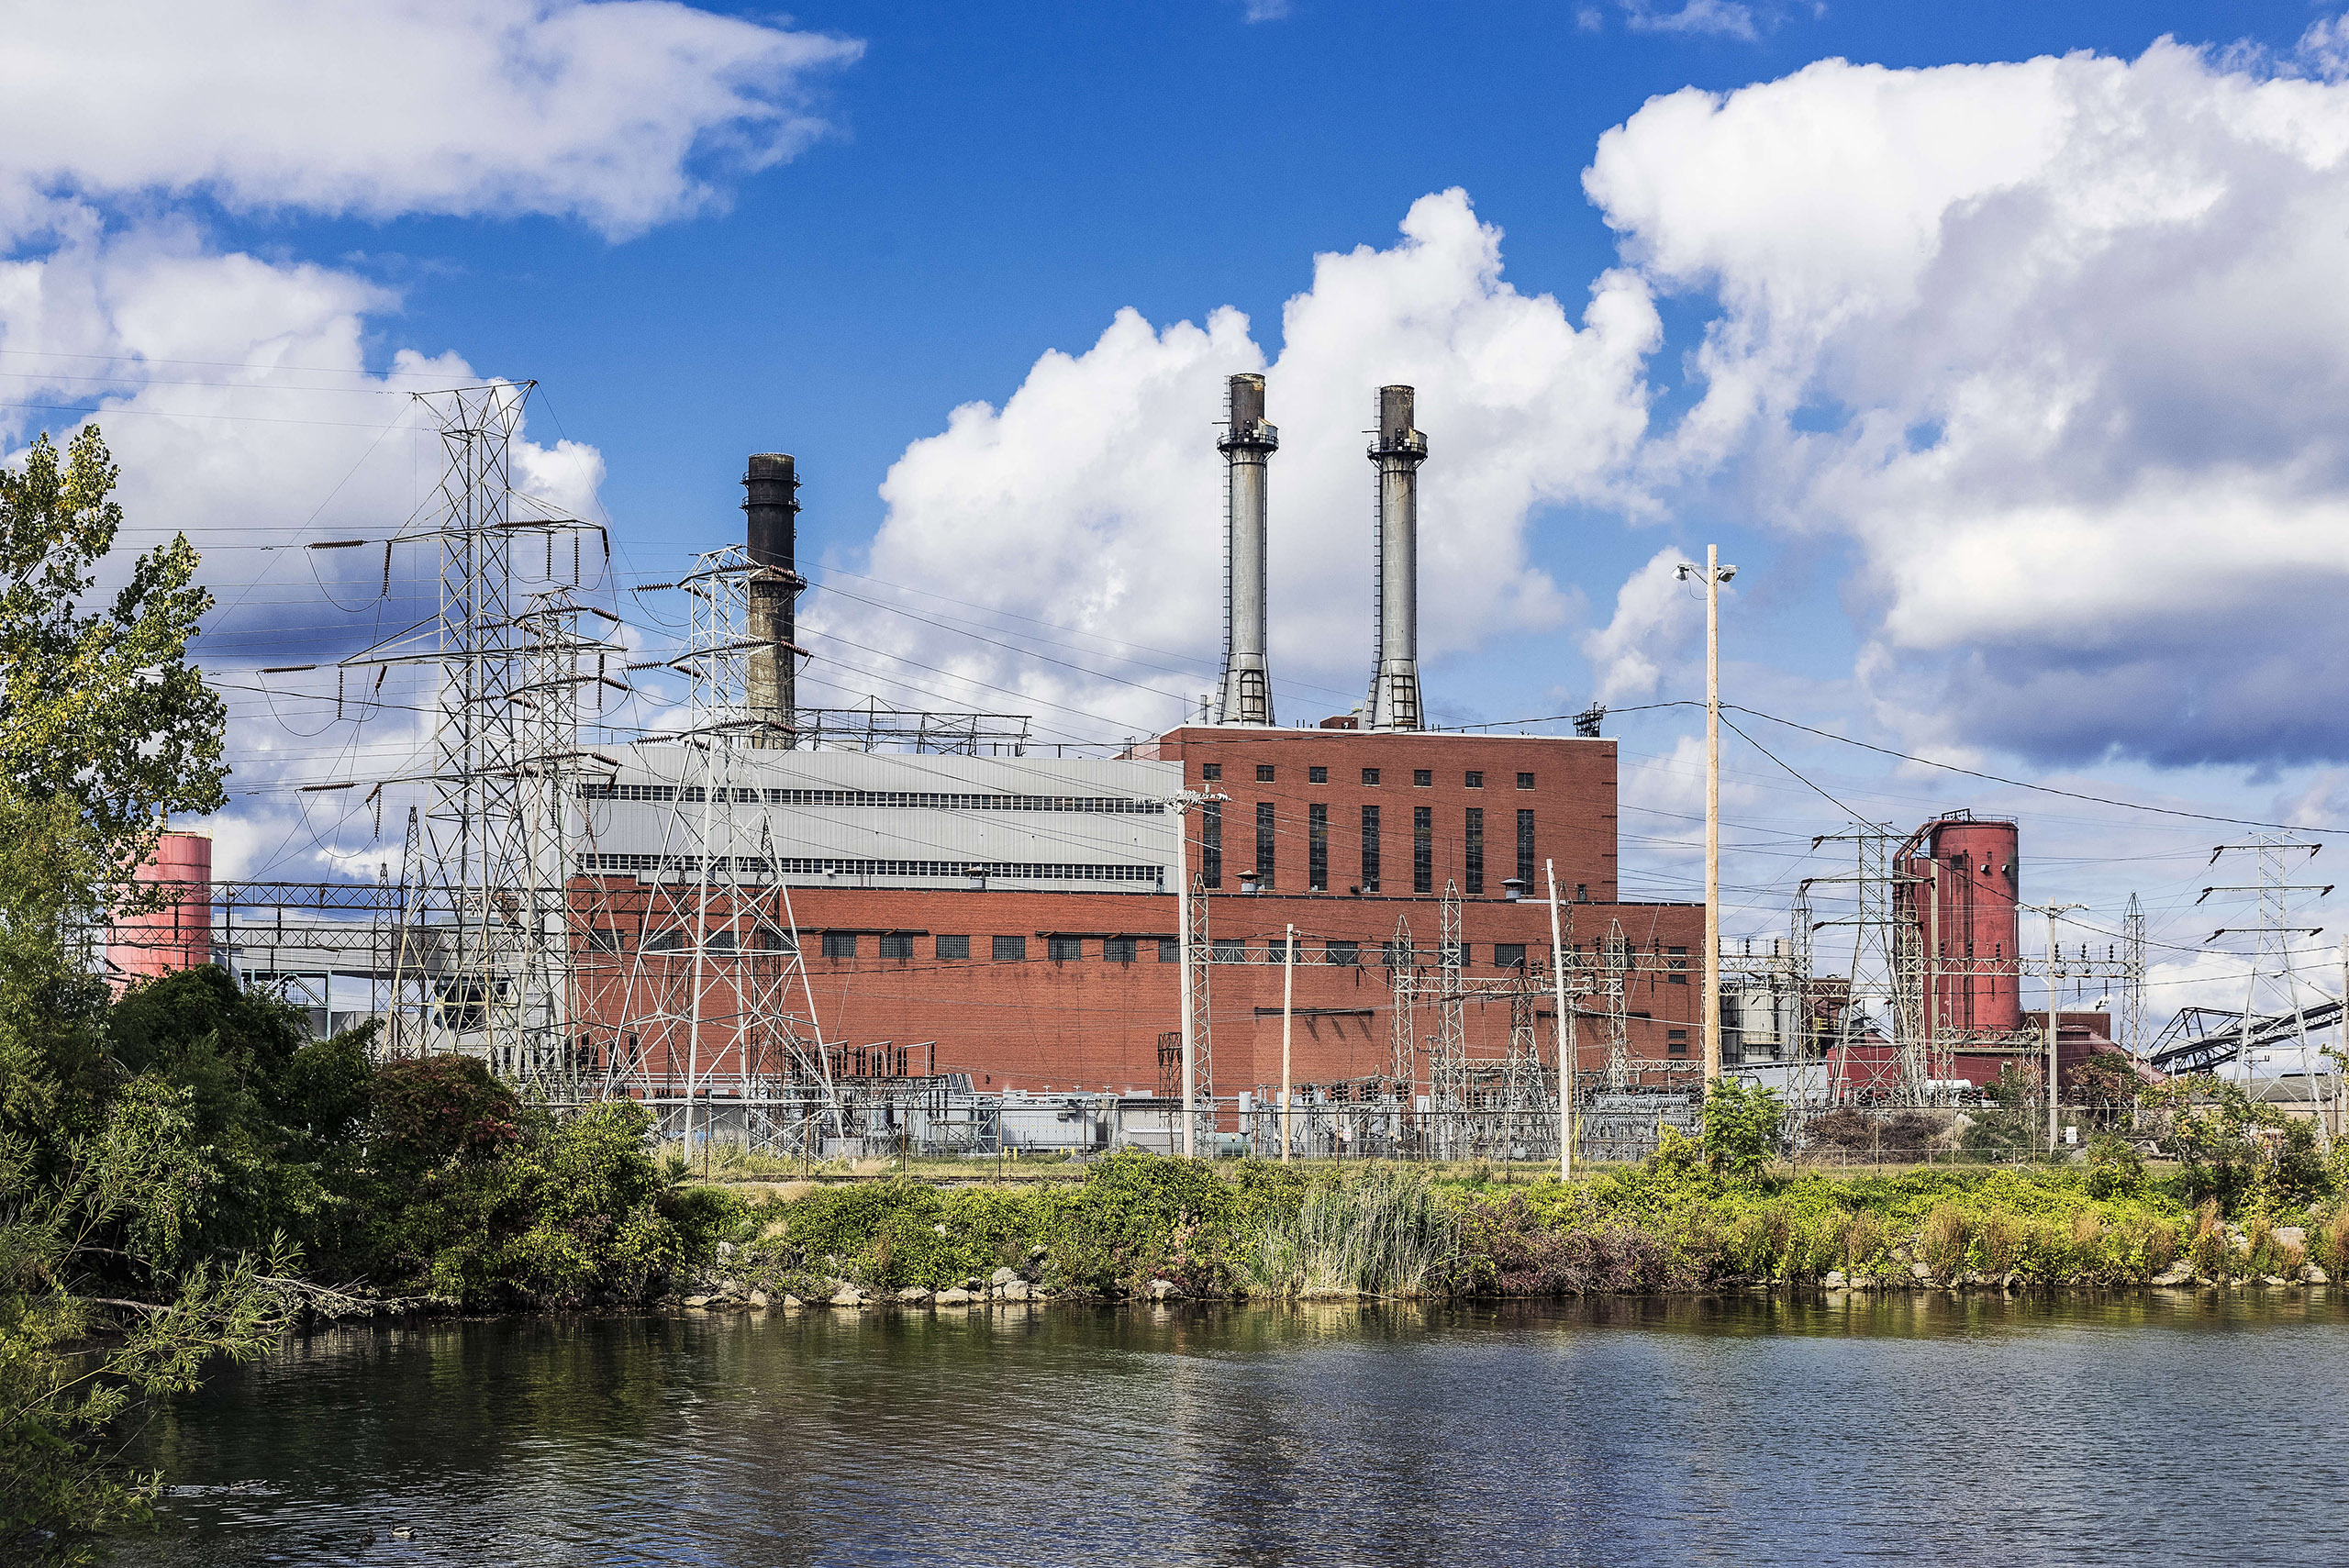 A NRG owned coal fired energy facility that plans to convert